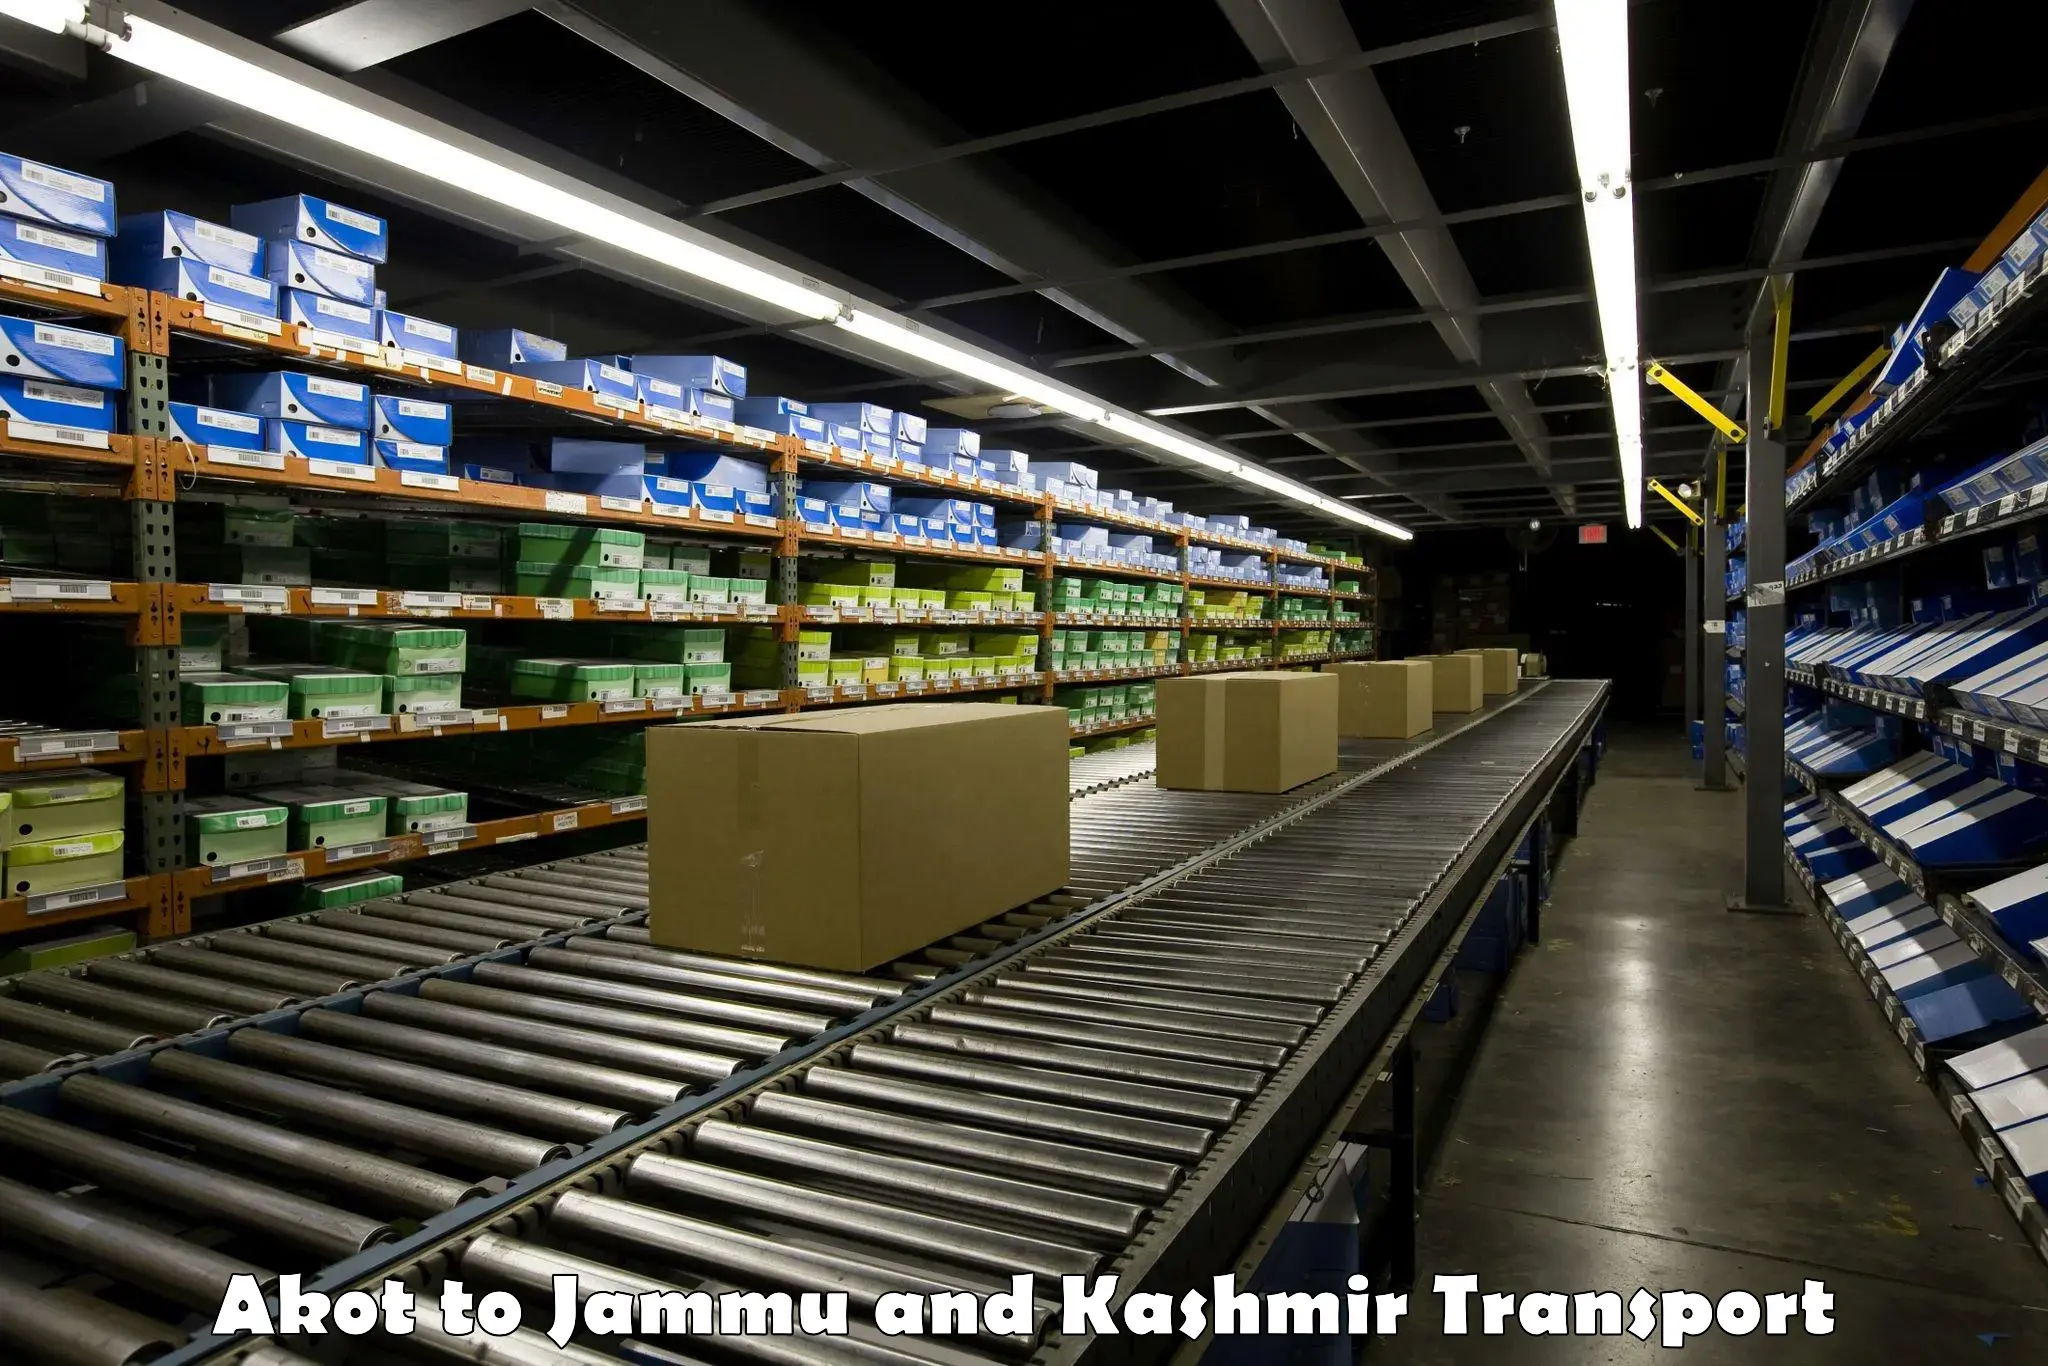 Truck transport companies in India Akot to Baramulla